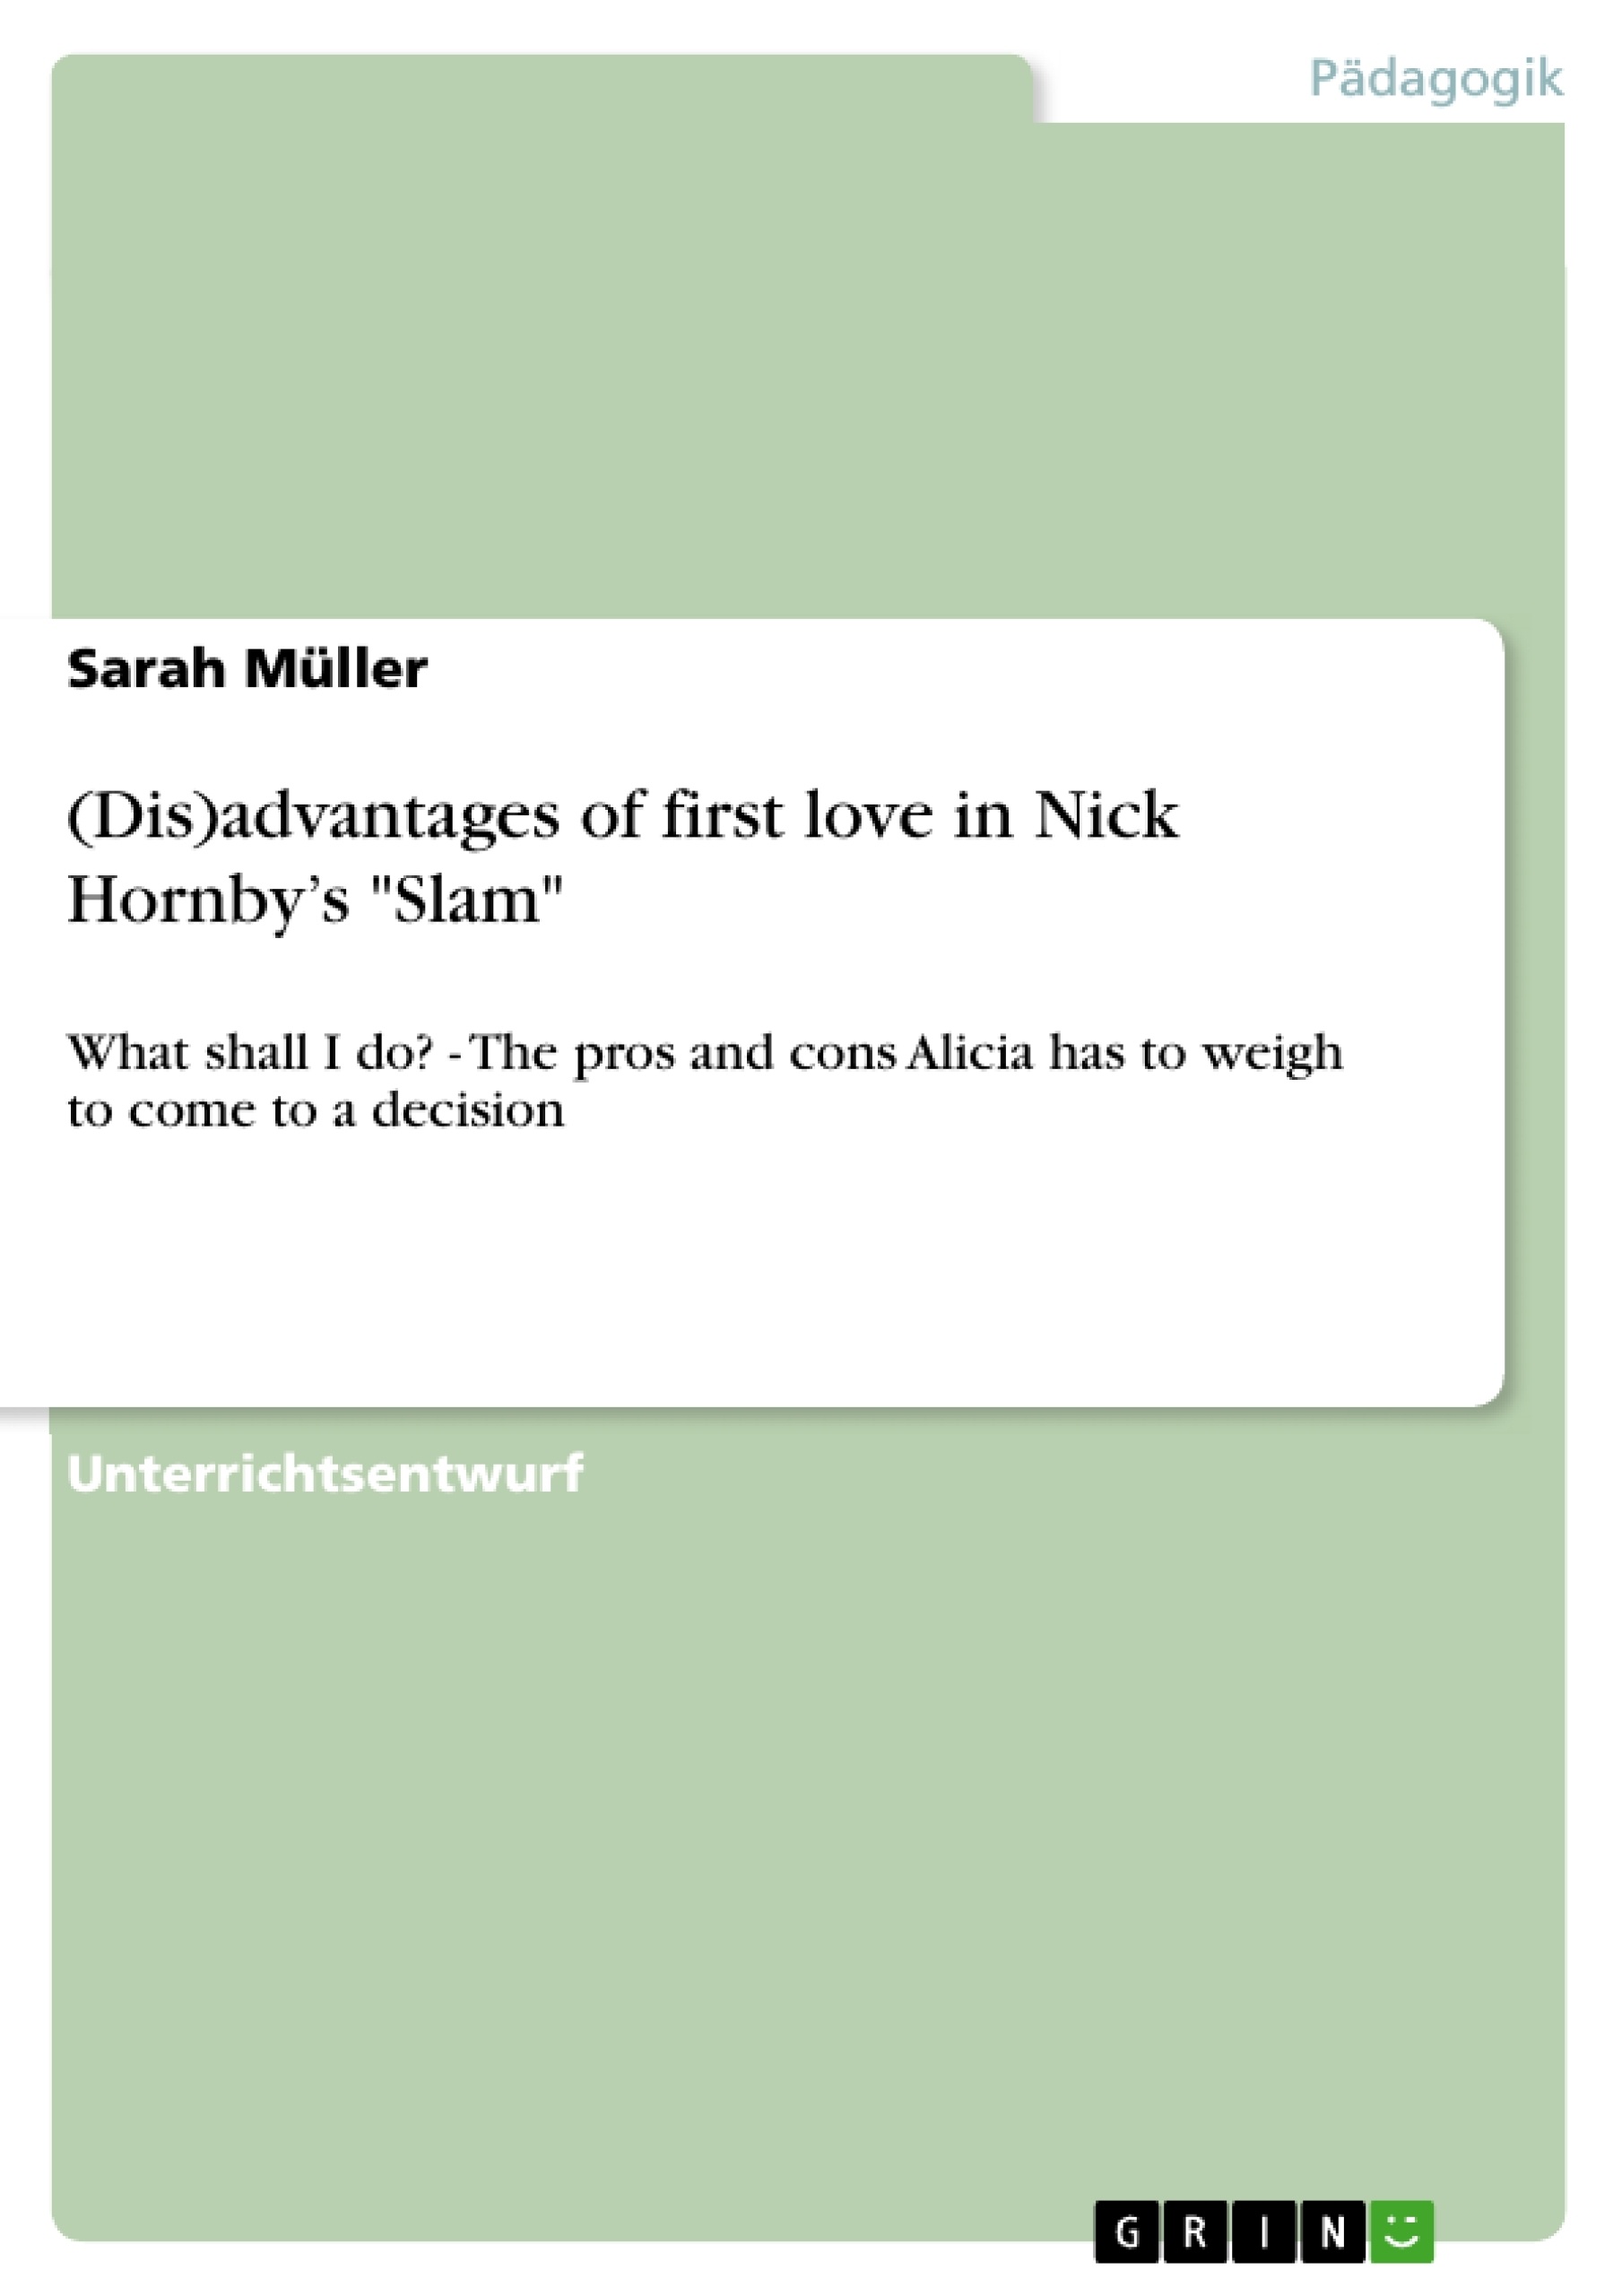 Titel: (Dis)advantages of first love in Nick Hornby’s "Slam"